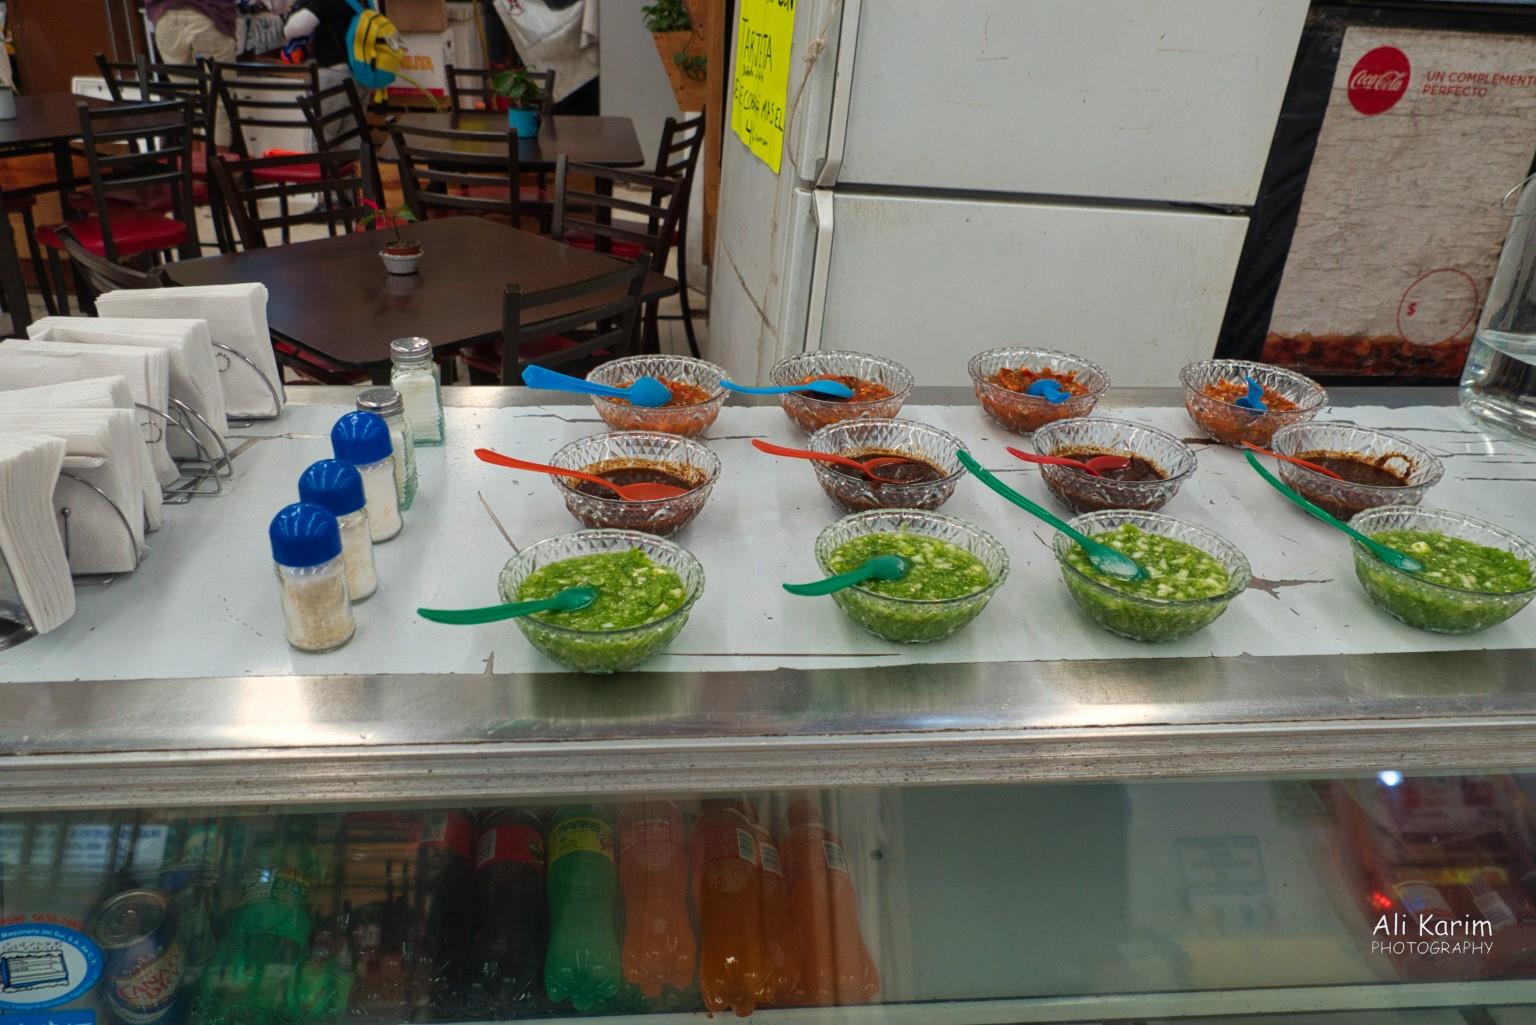 Mexico City, Mexico, Dec 2019, These salsa’s looked inviting & dangerous at the same time